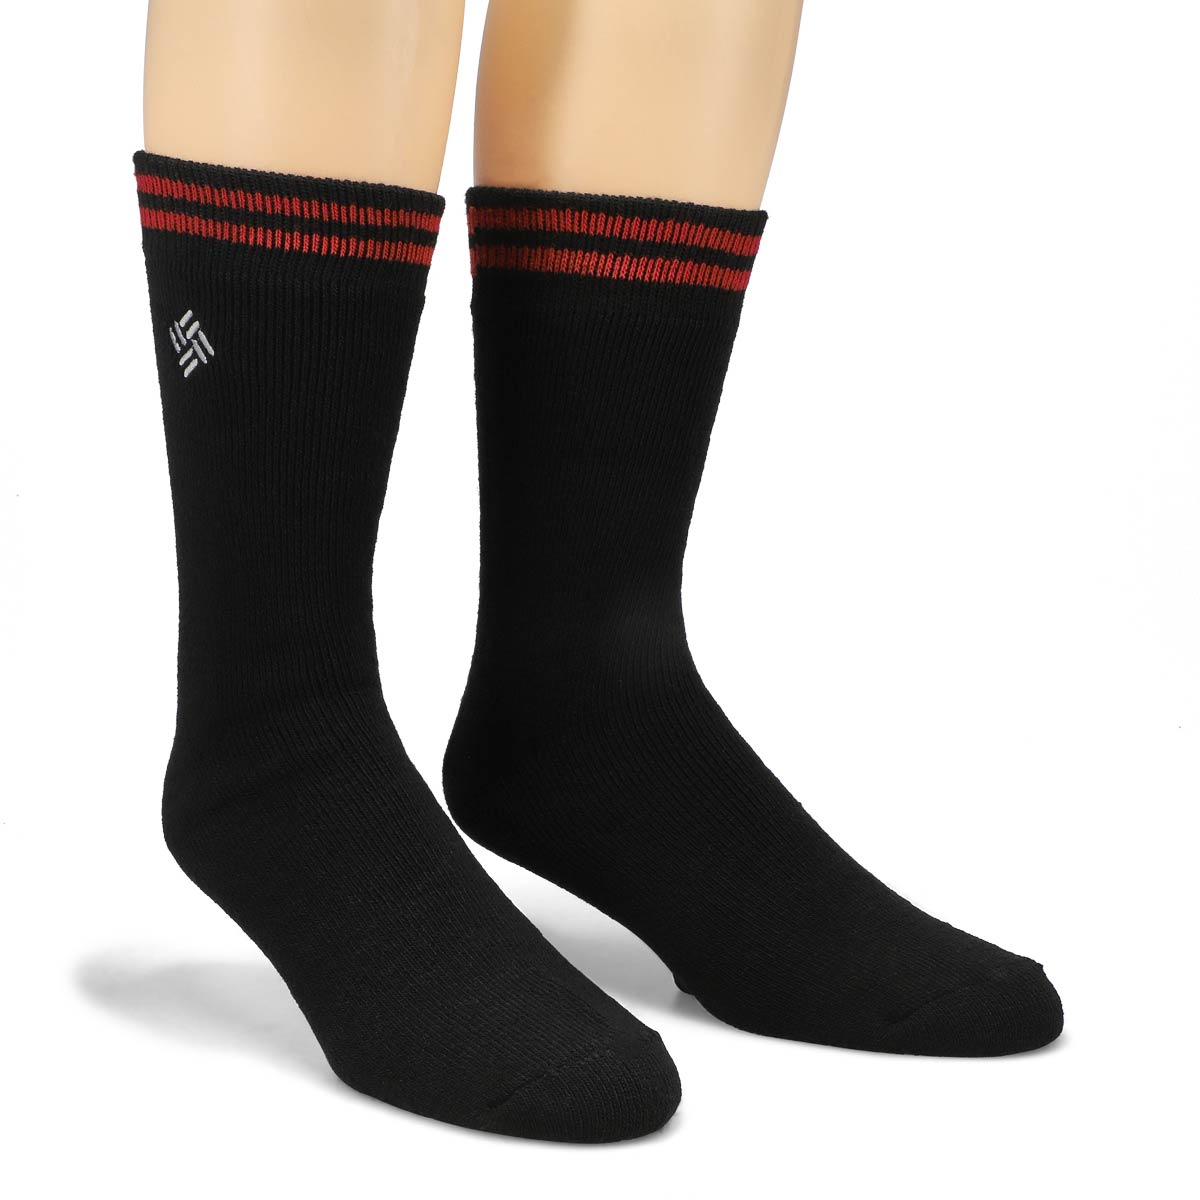 Chaussettes thermiques THERMAL CREW, hommes - 2 p.